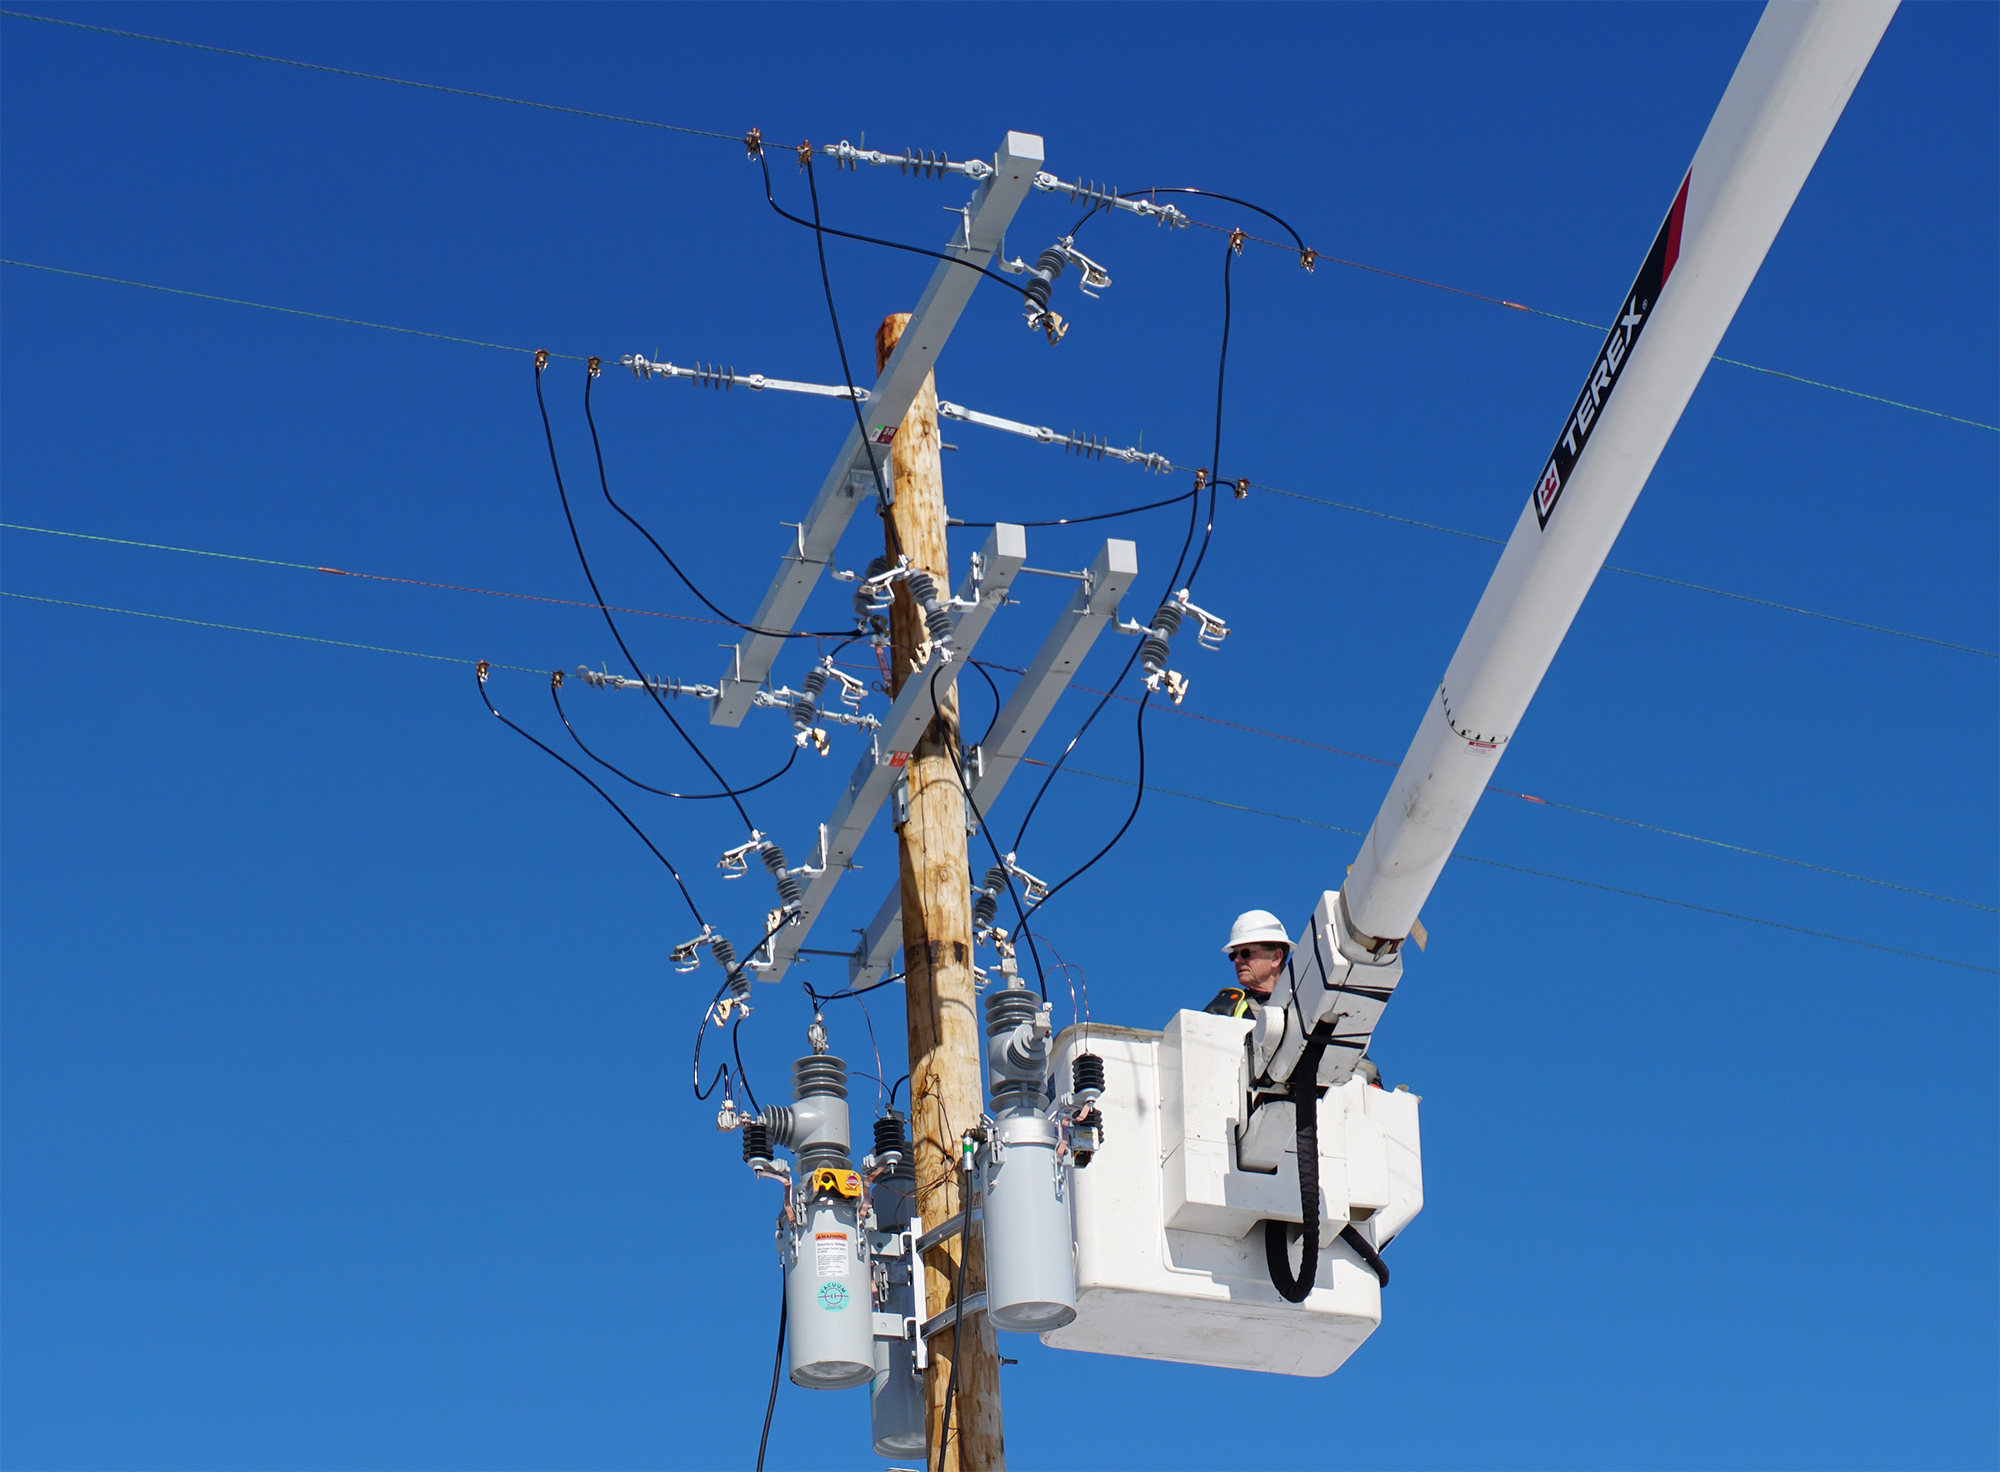 MEC Lineman sets up distribution automation capabilities on one of utility poles